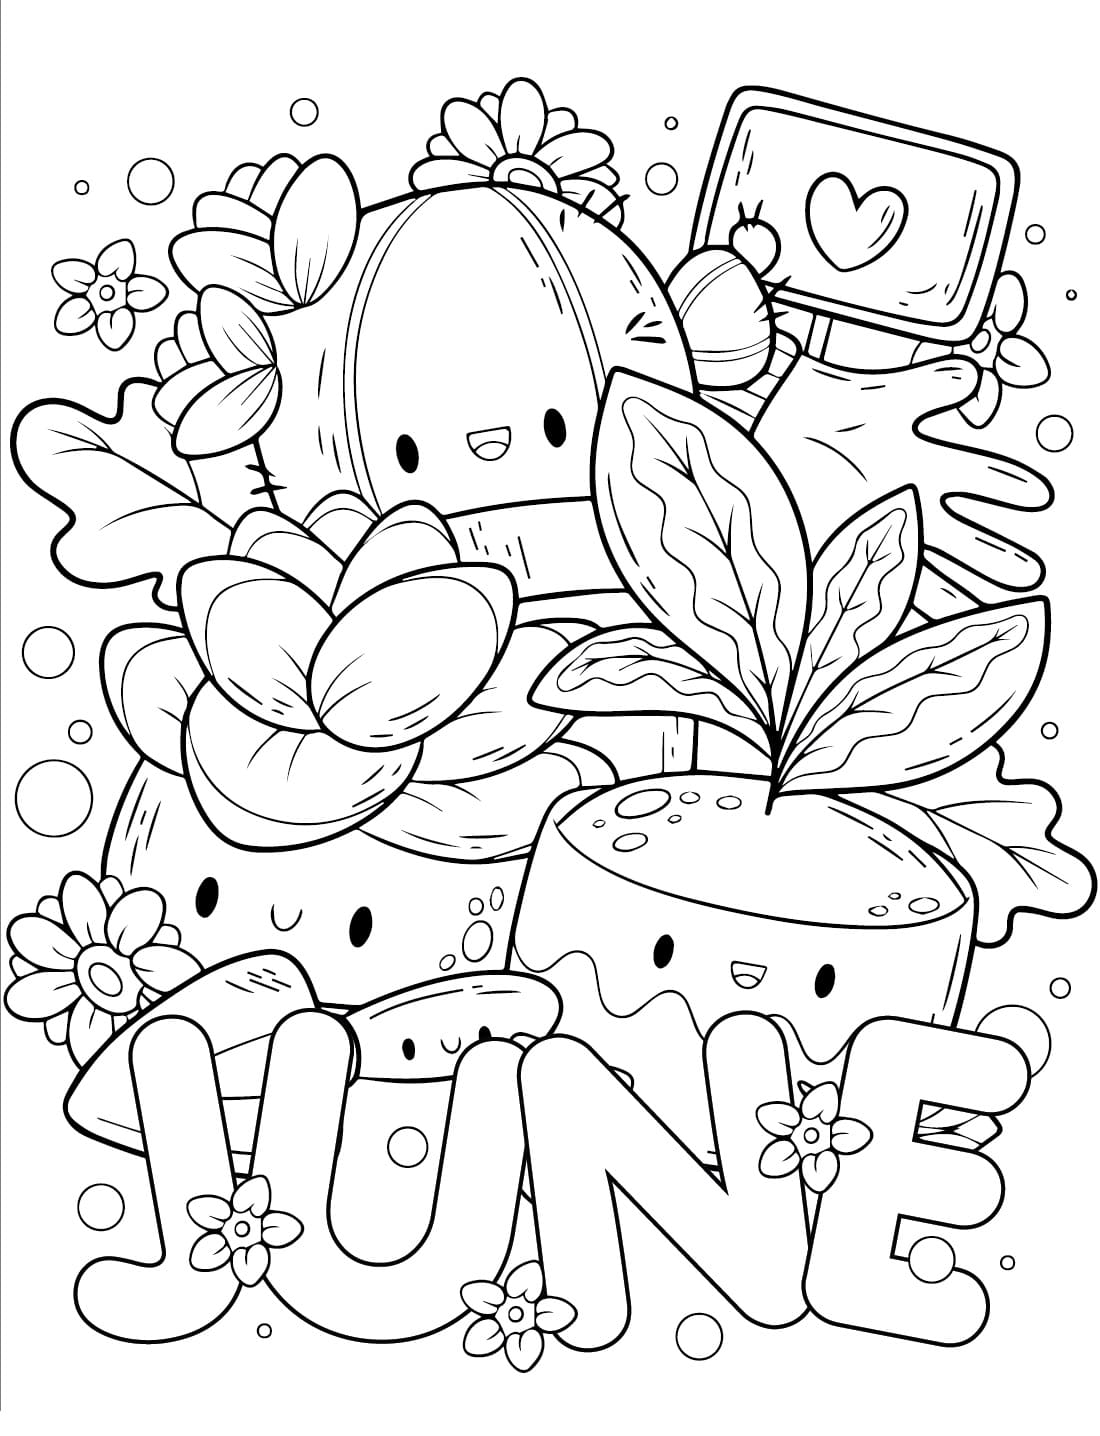 Cute June coloring page - Download, Print or Color Online for Free